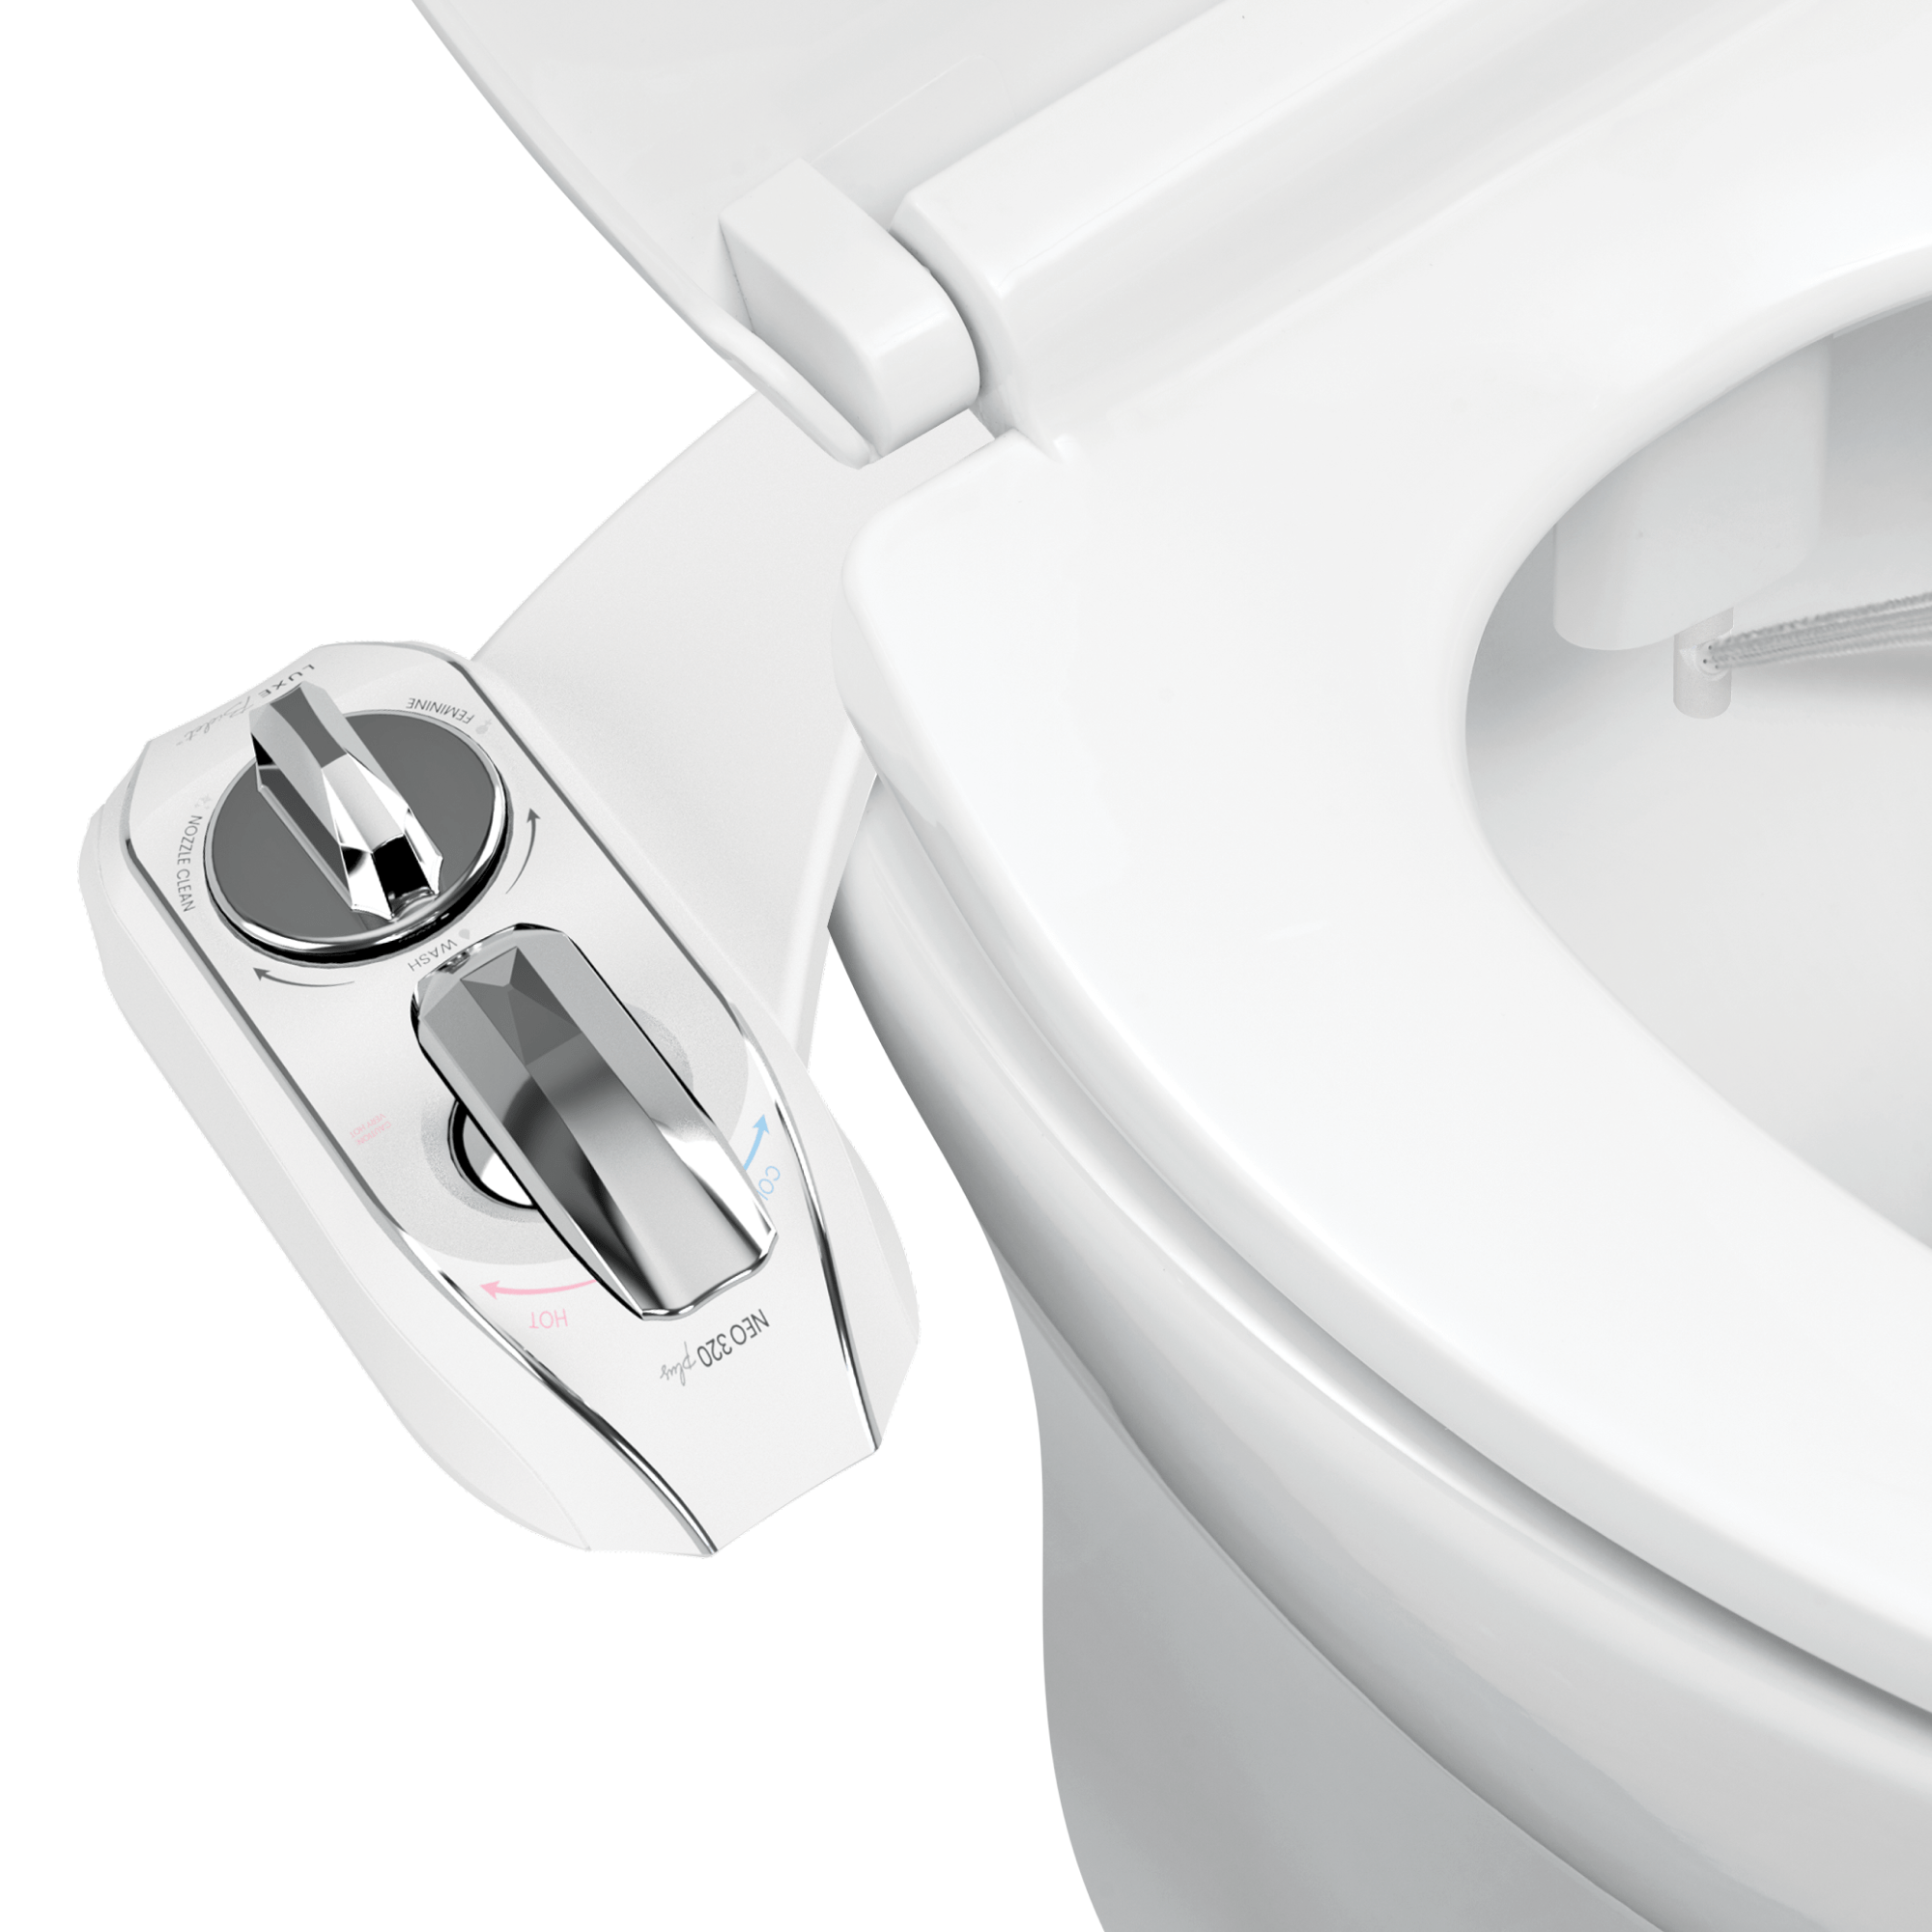 NEO 320 Plus: Imperfect Packaging - NEO 320 Plus Chrome installed on a toilet with water spraying from nozzles